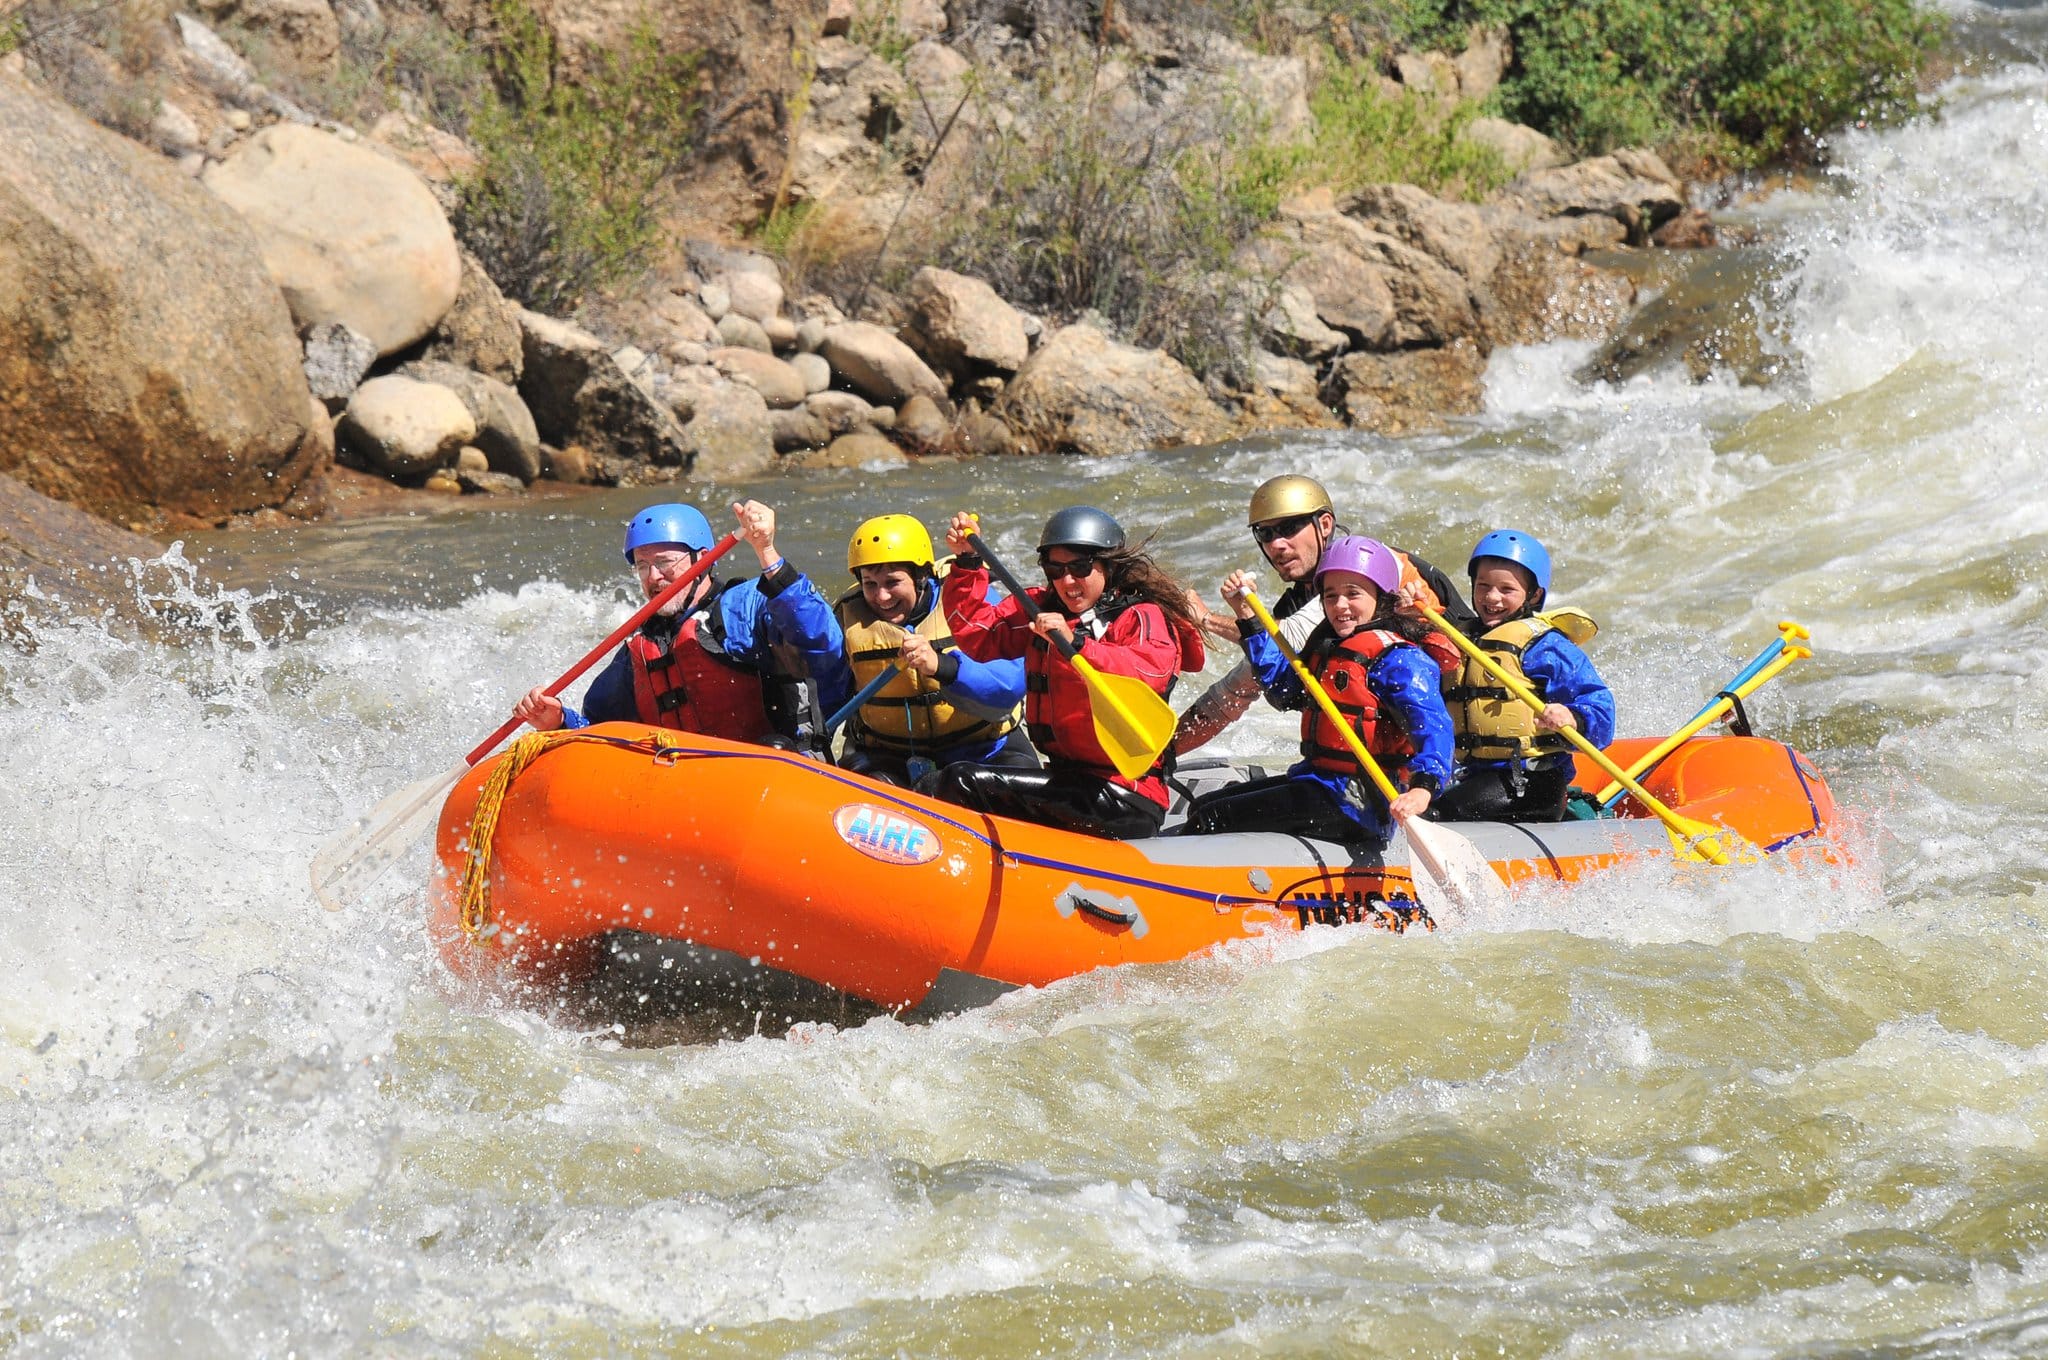 A raft filled with six guests paddling down a river in rapids on a sunny day.